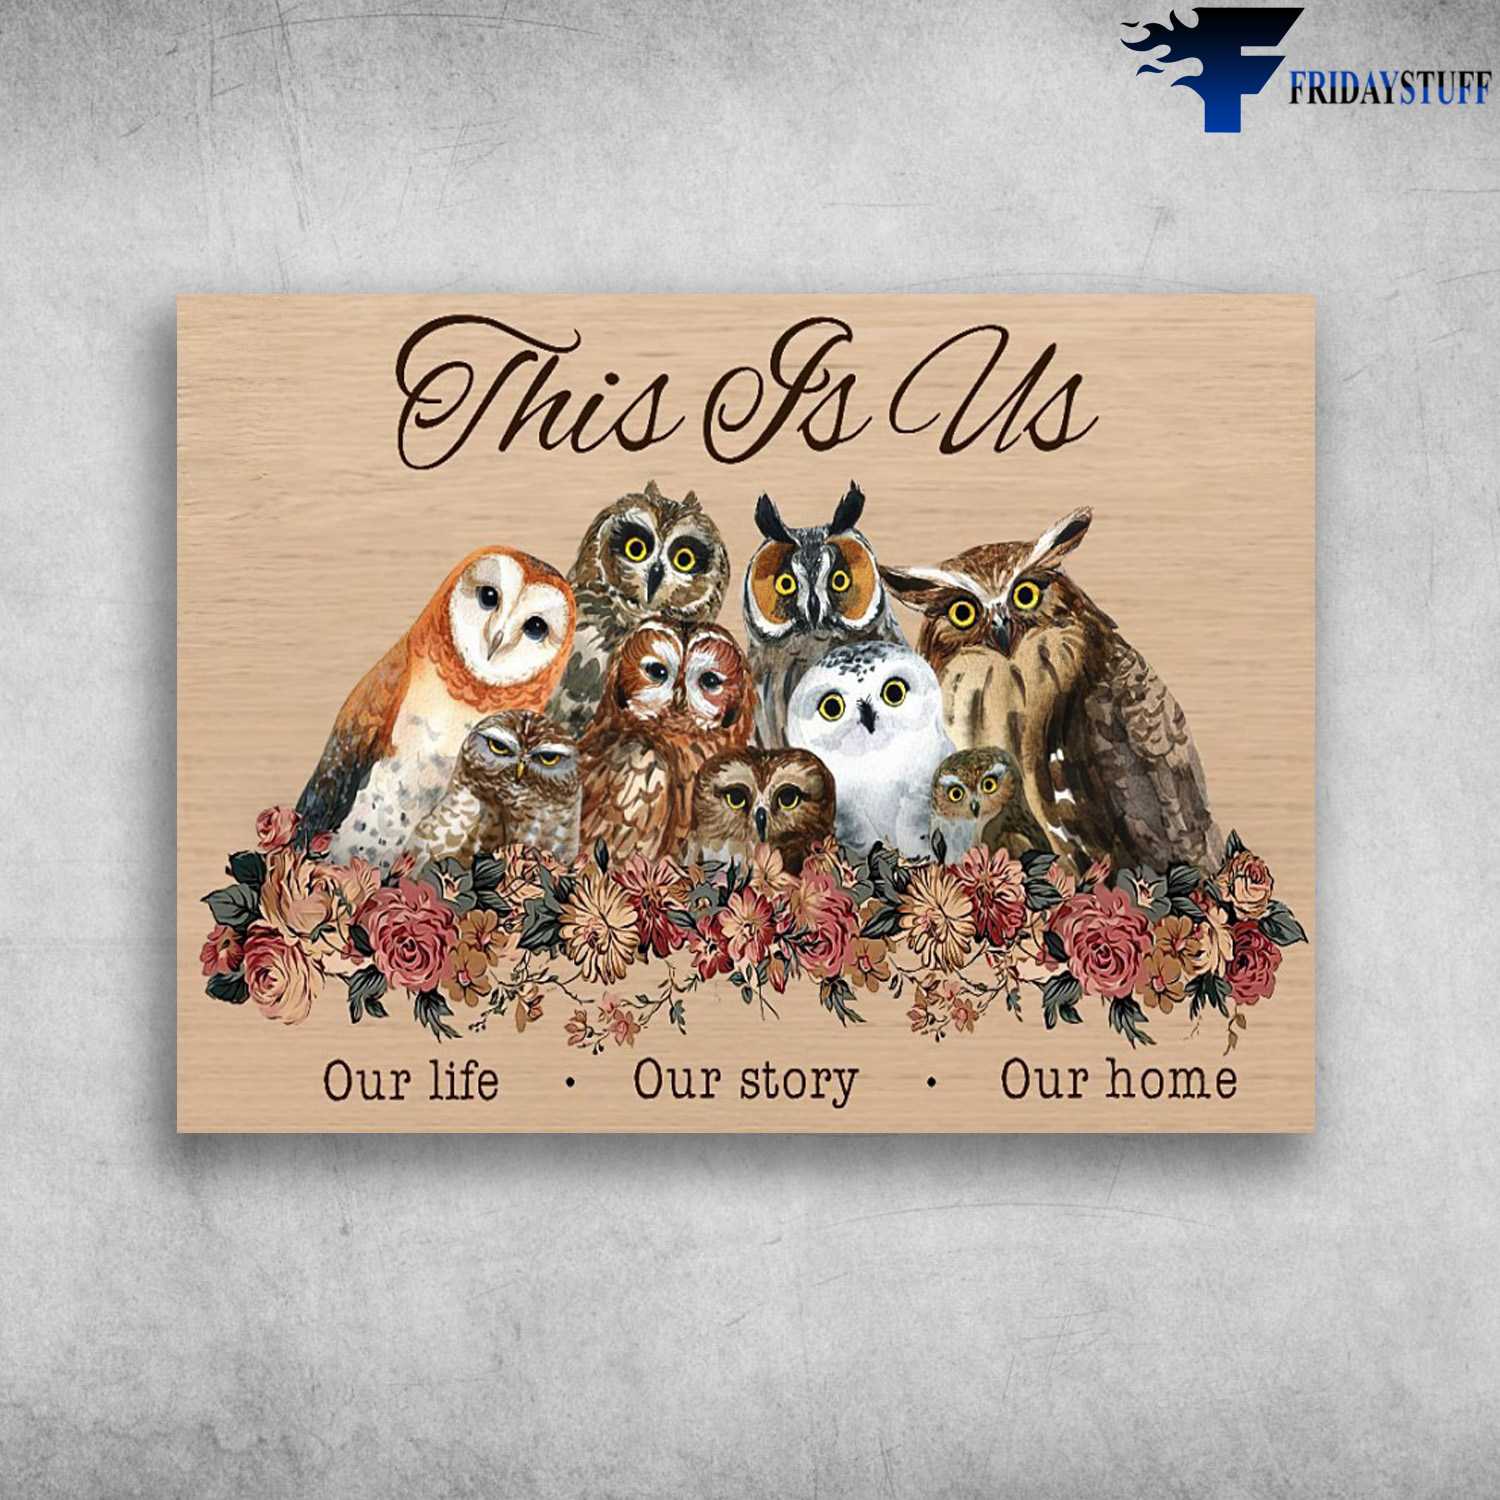 Owl Family - This Is Us, Our Life, Our Story, Our Home